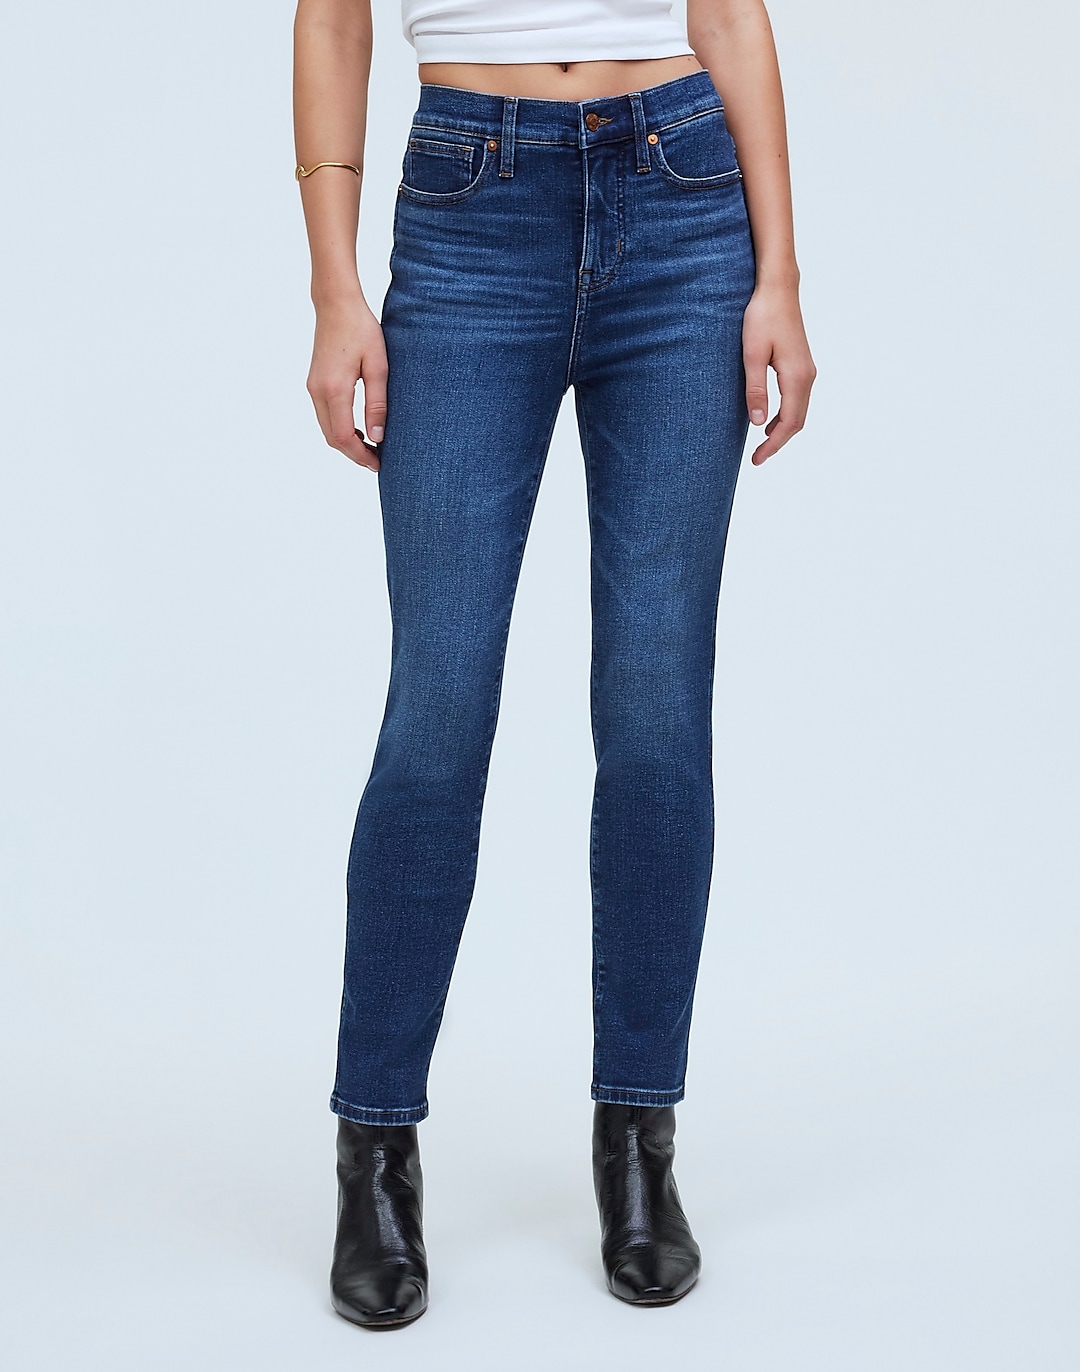 Stovepipe Jeans in Pendleton Wash | Madewell